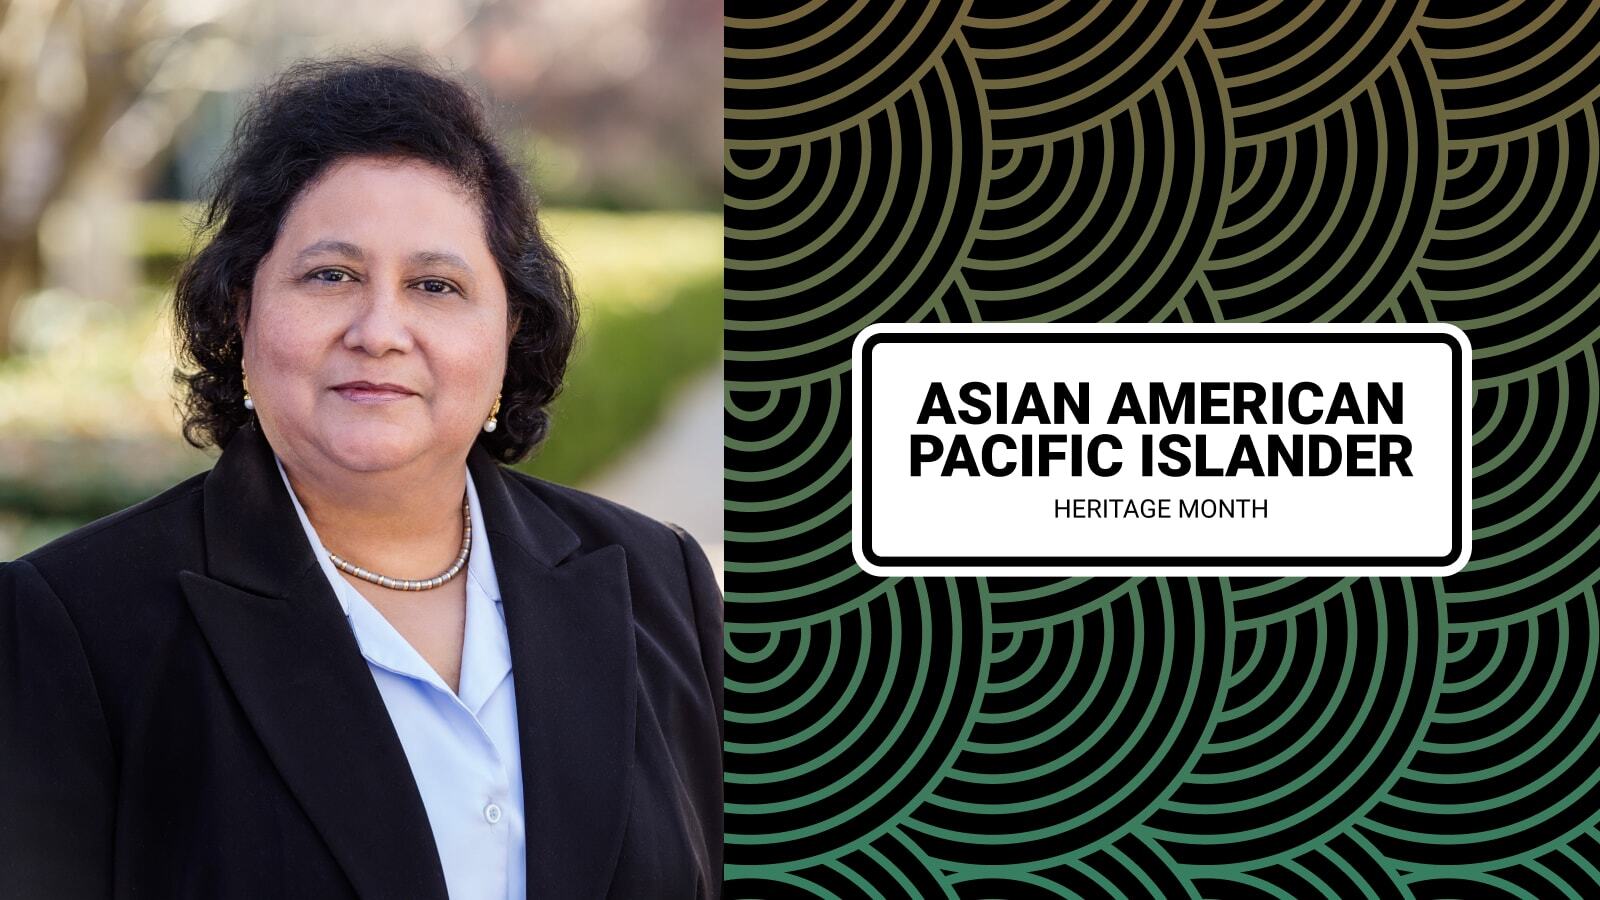 Photo of Aarti Gupta on left.  Graphic on the right with the text "Asian American Pacific Islander Heritage Month".